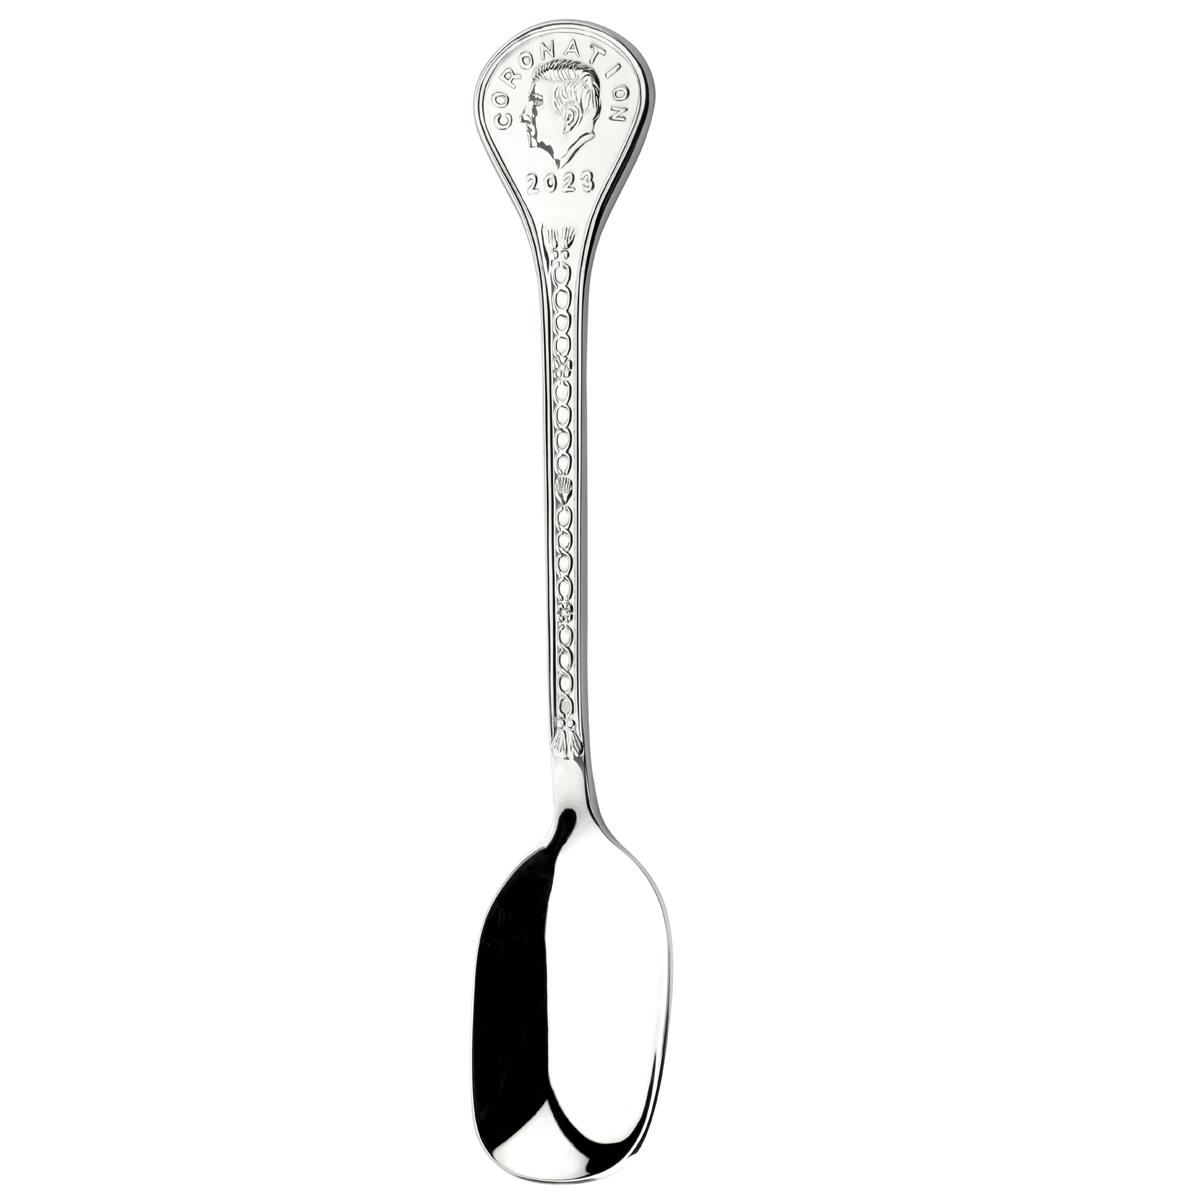 What color is the Arthur Price coronation spoon 2023, King Charles III edition?